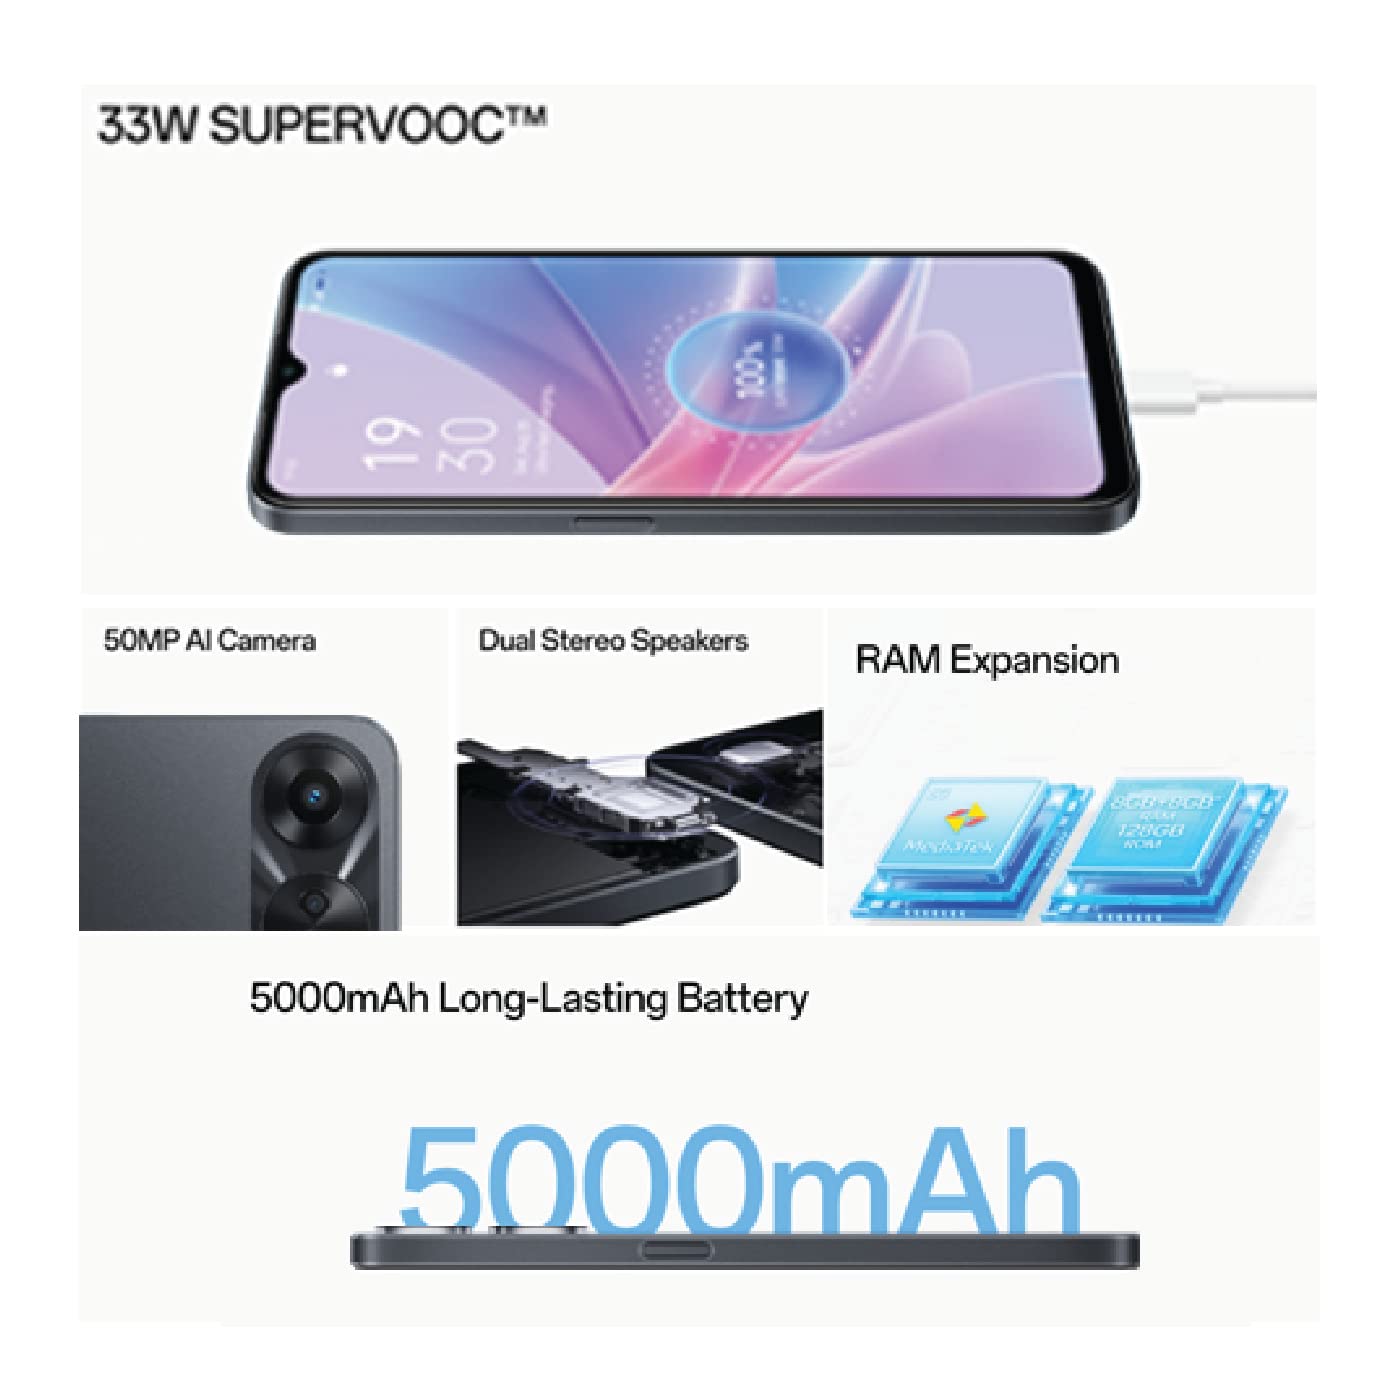 OPPO A78 5G Dual SIM 6.56 inches Smartphone 128GB 8GB RAM|5000mAh Long Lasting Battery |Fingerprint and Face Recognition | 5G Android Phone, Glowing Black